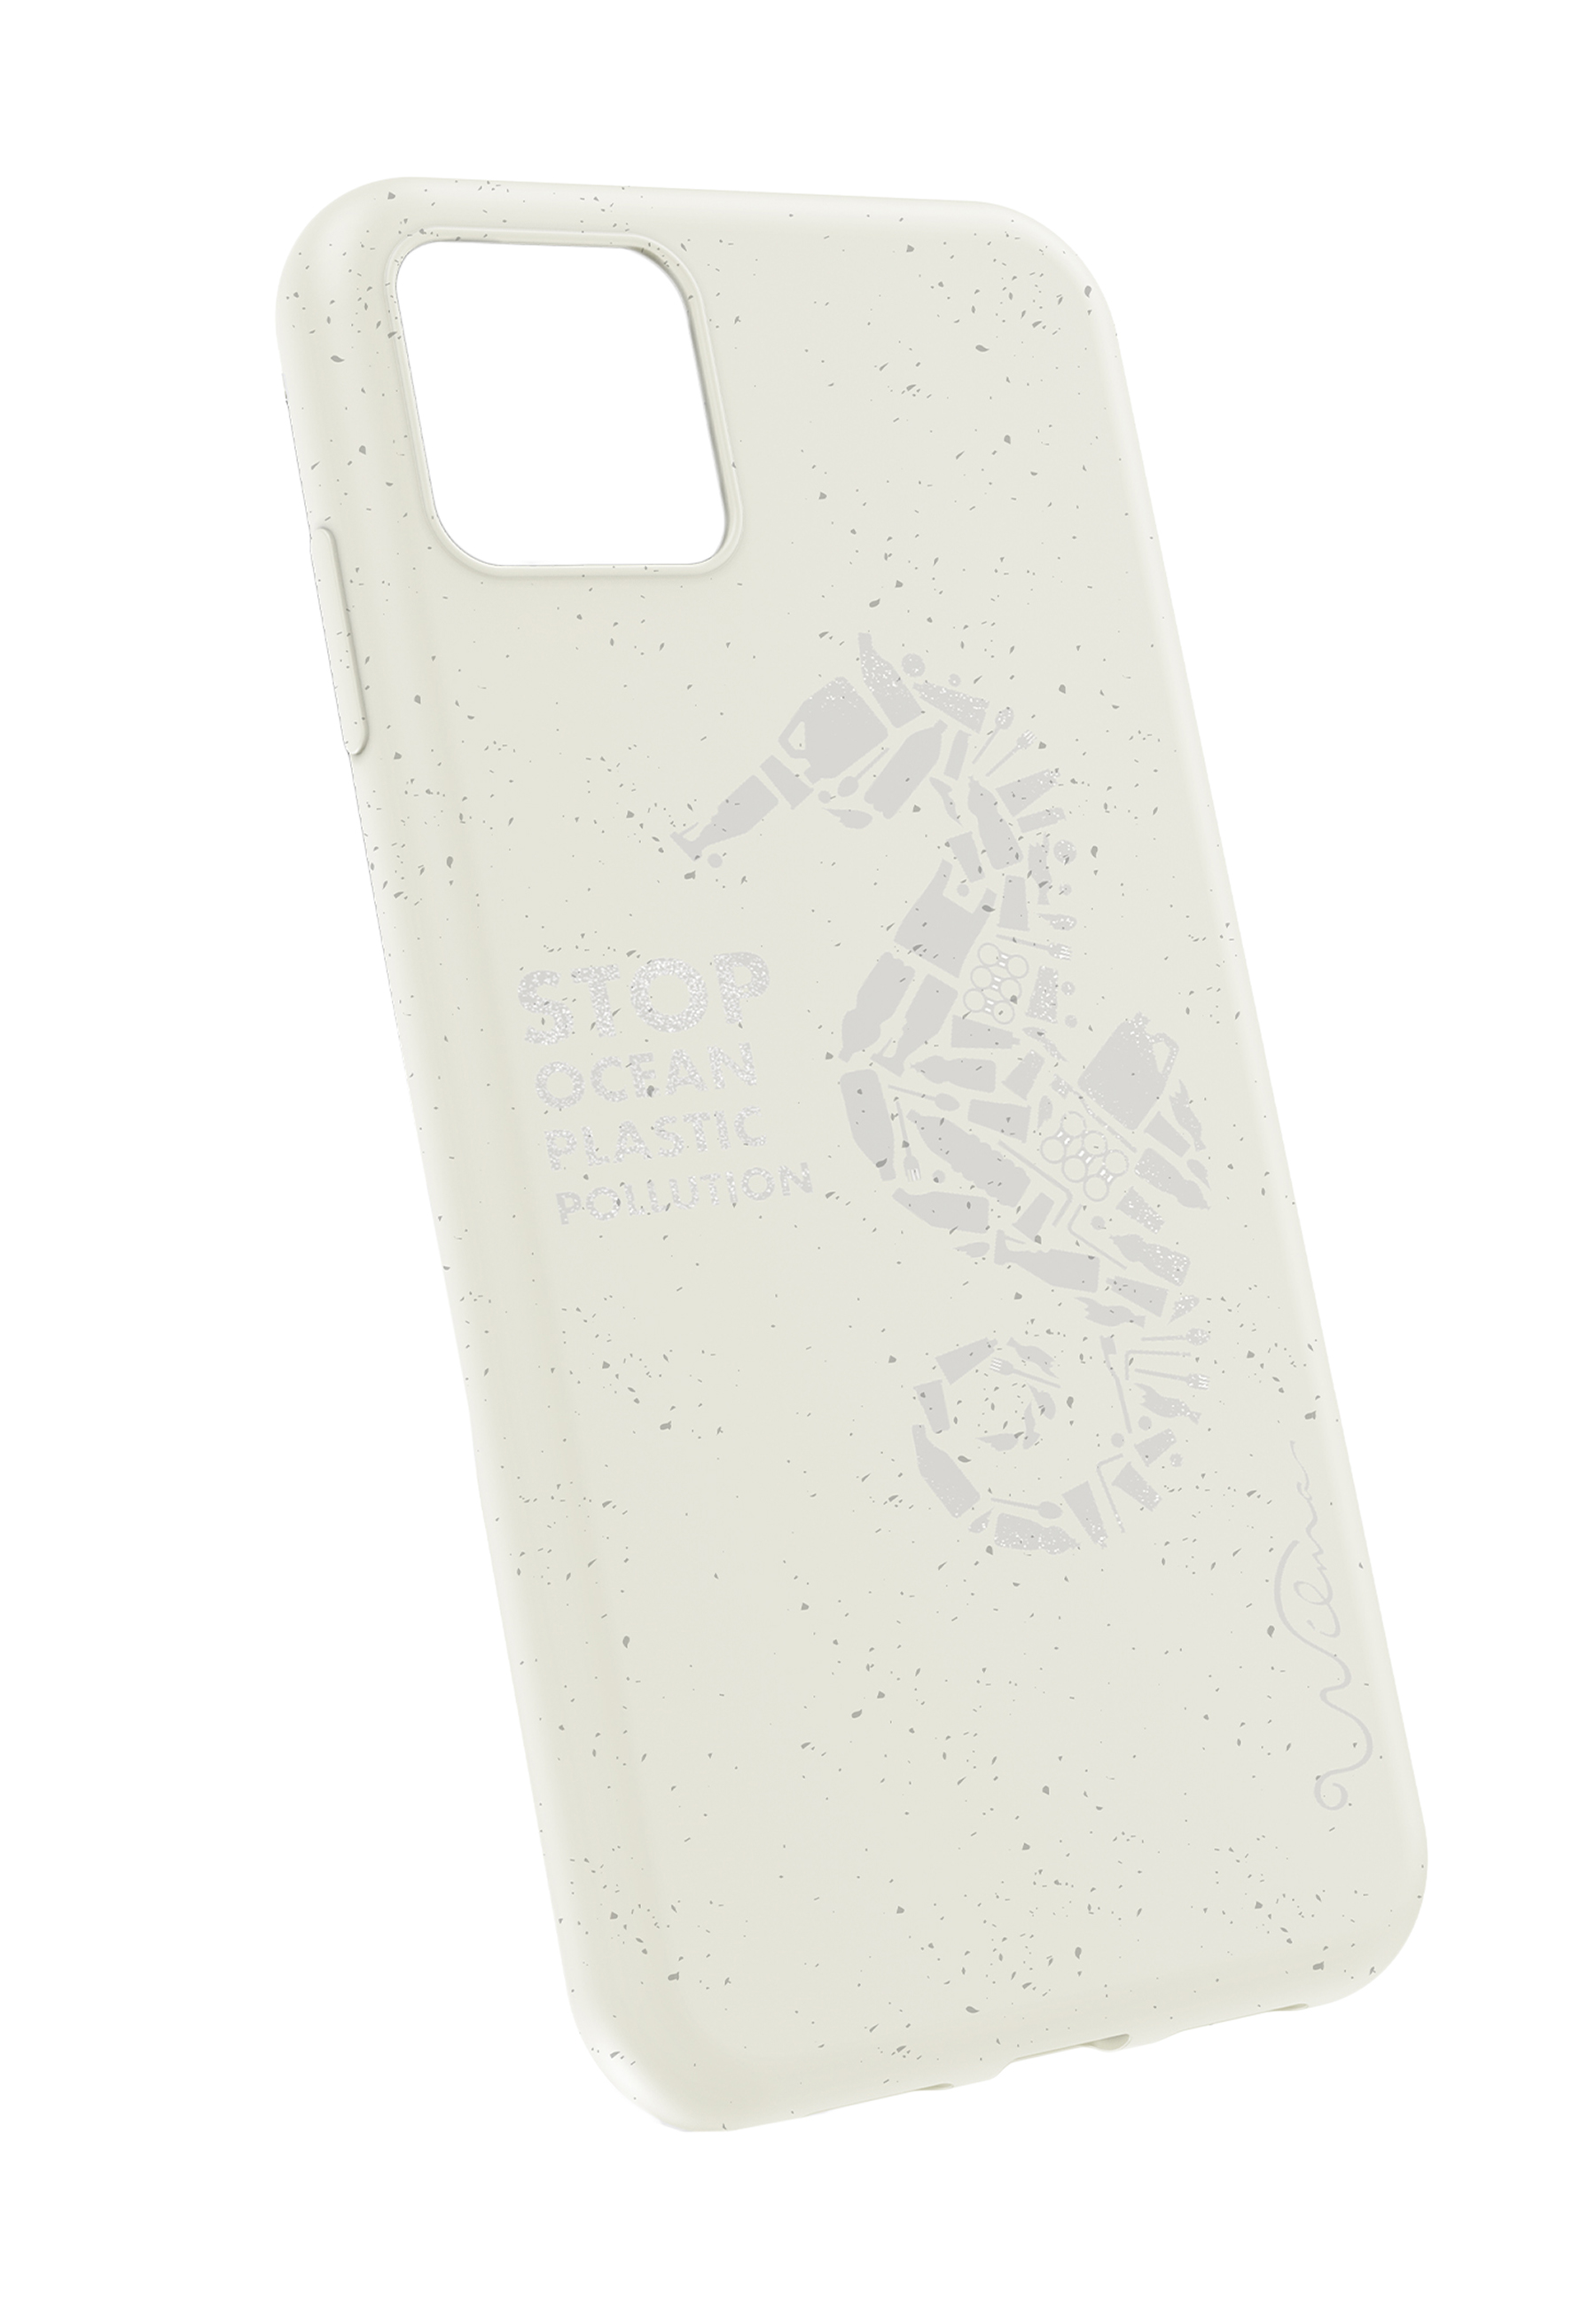 Apple, ECO iPhone Backcover, white WILMA FASHION 11 PRO, RIP11, BY